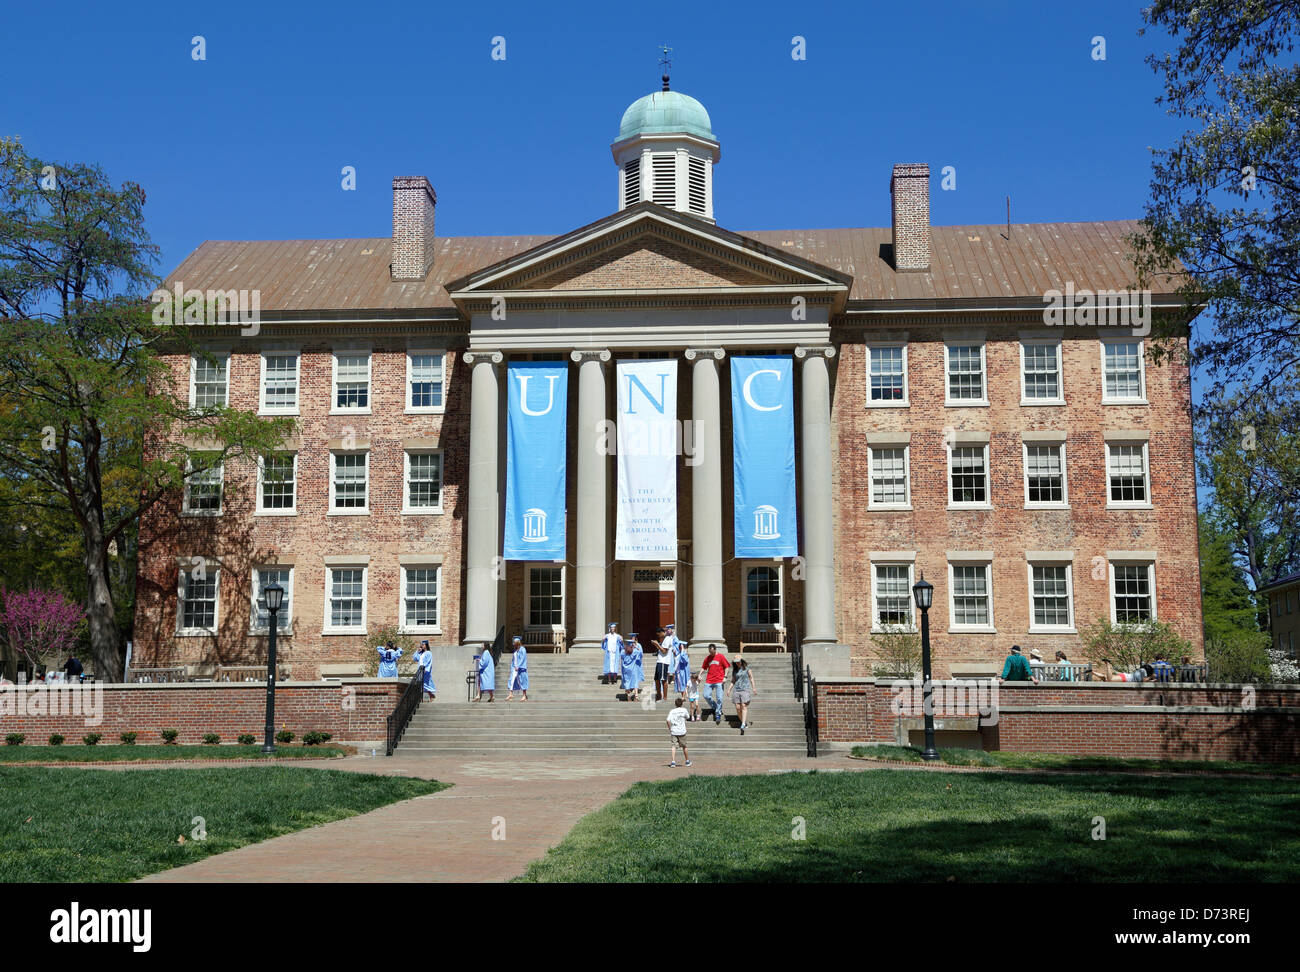 University of North Carolina, Chapel Hill, UNC. Students in graduation gowns on the steps of the South building. Stock Photo